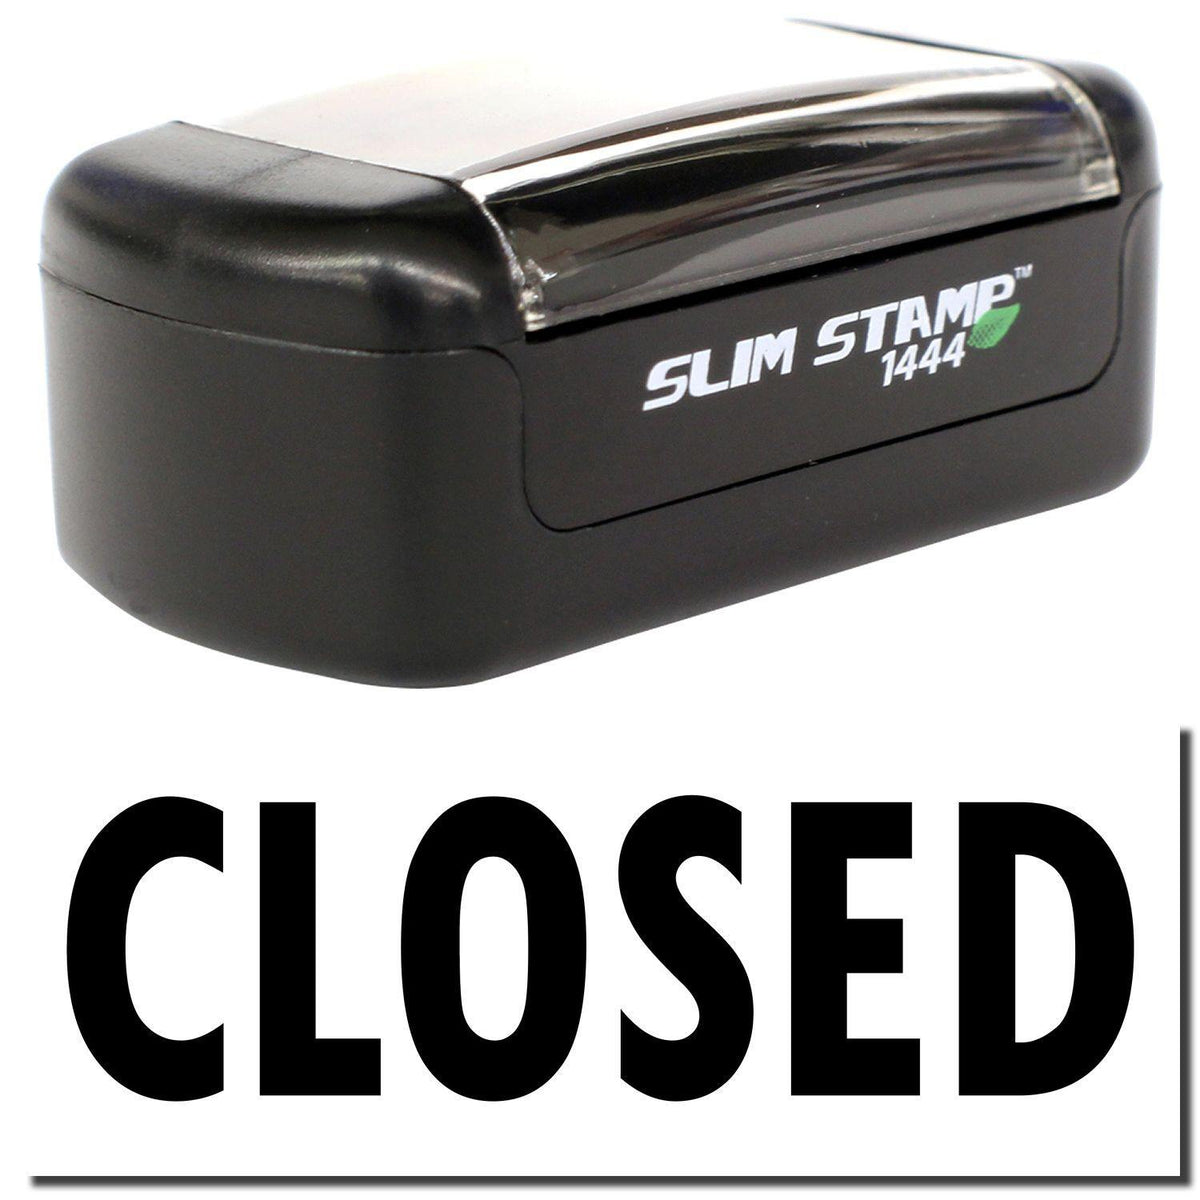 A stock office pre-inked stamp with a stamped image showing how the text &quot;CLOSED&quot; is displayed after stamping.